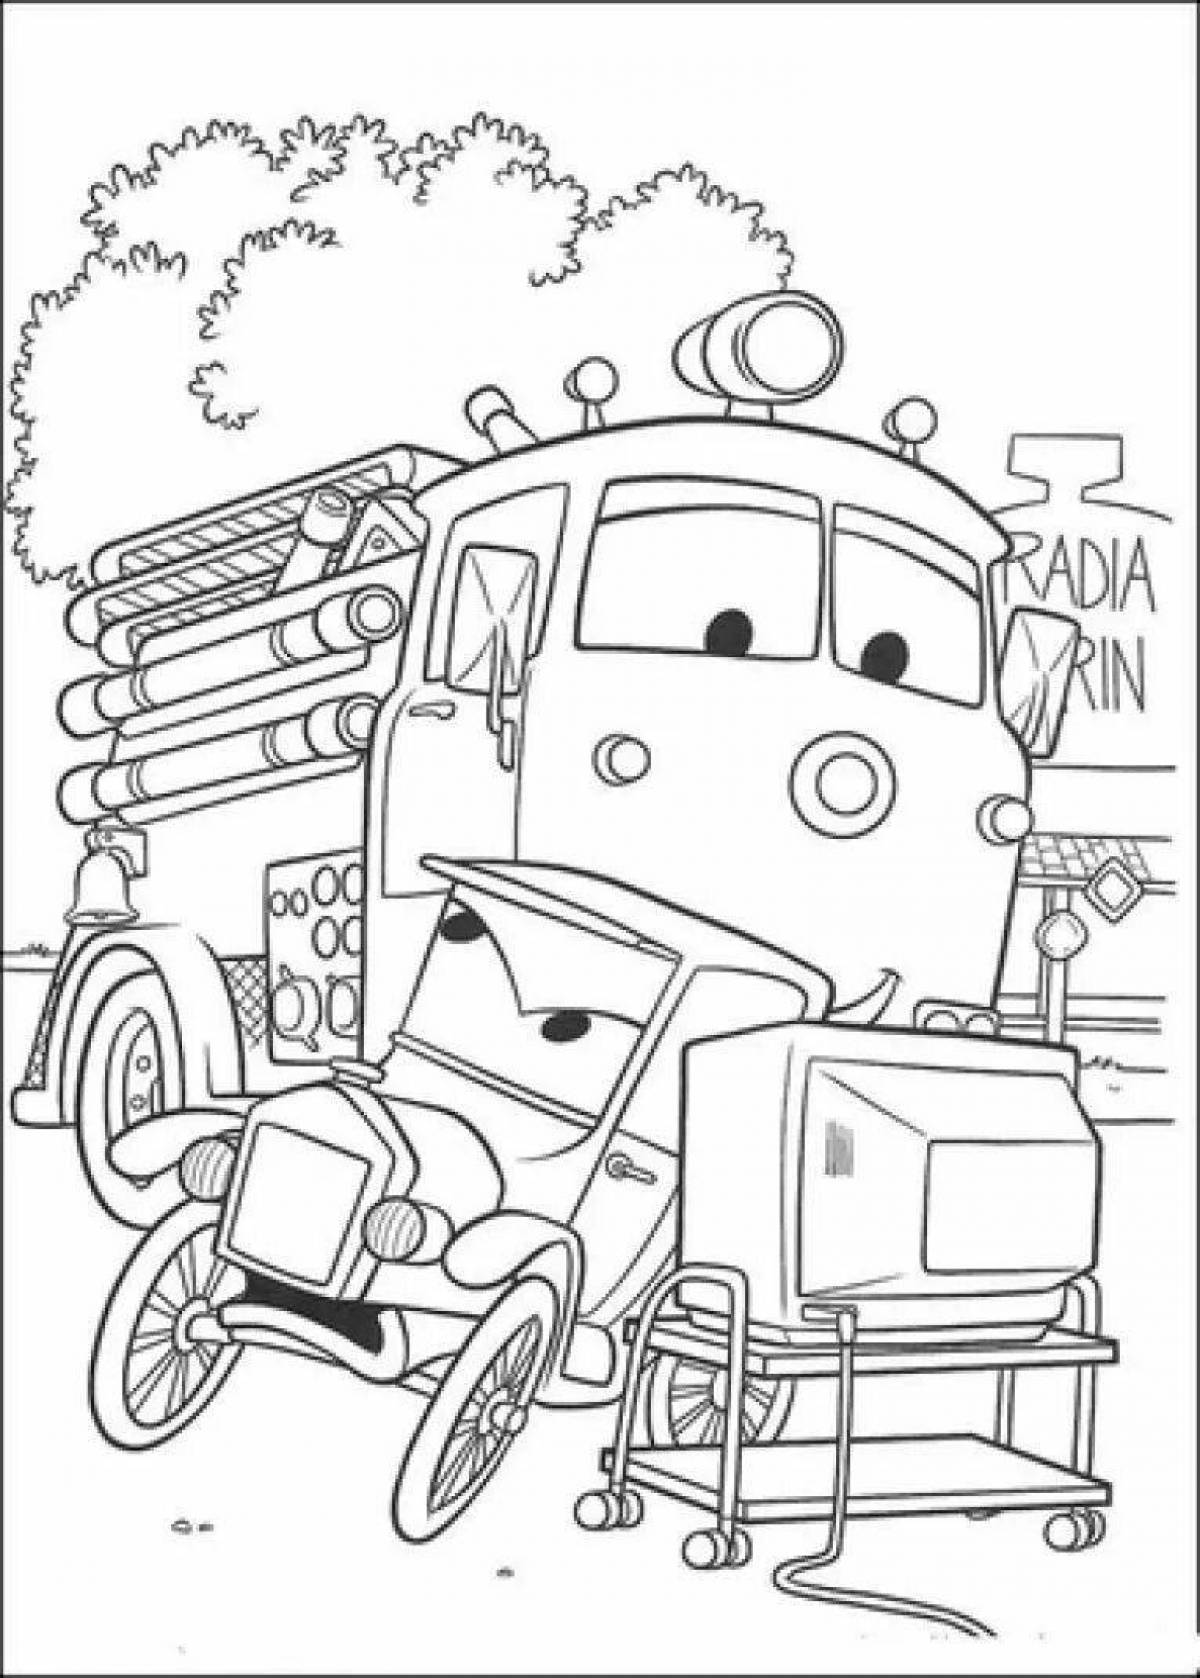 Ray and fire patrol interacting coloring page